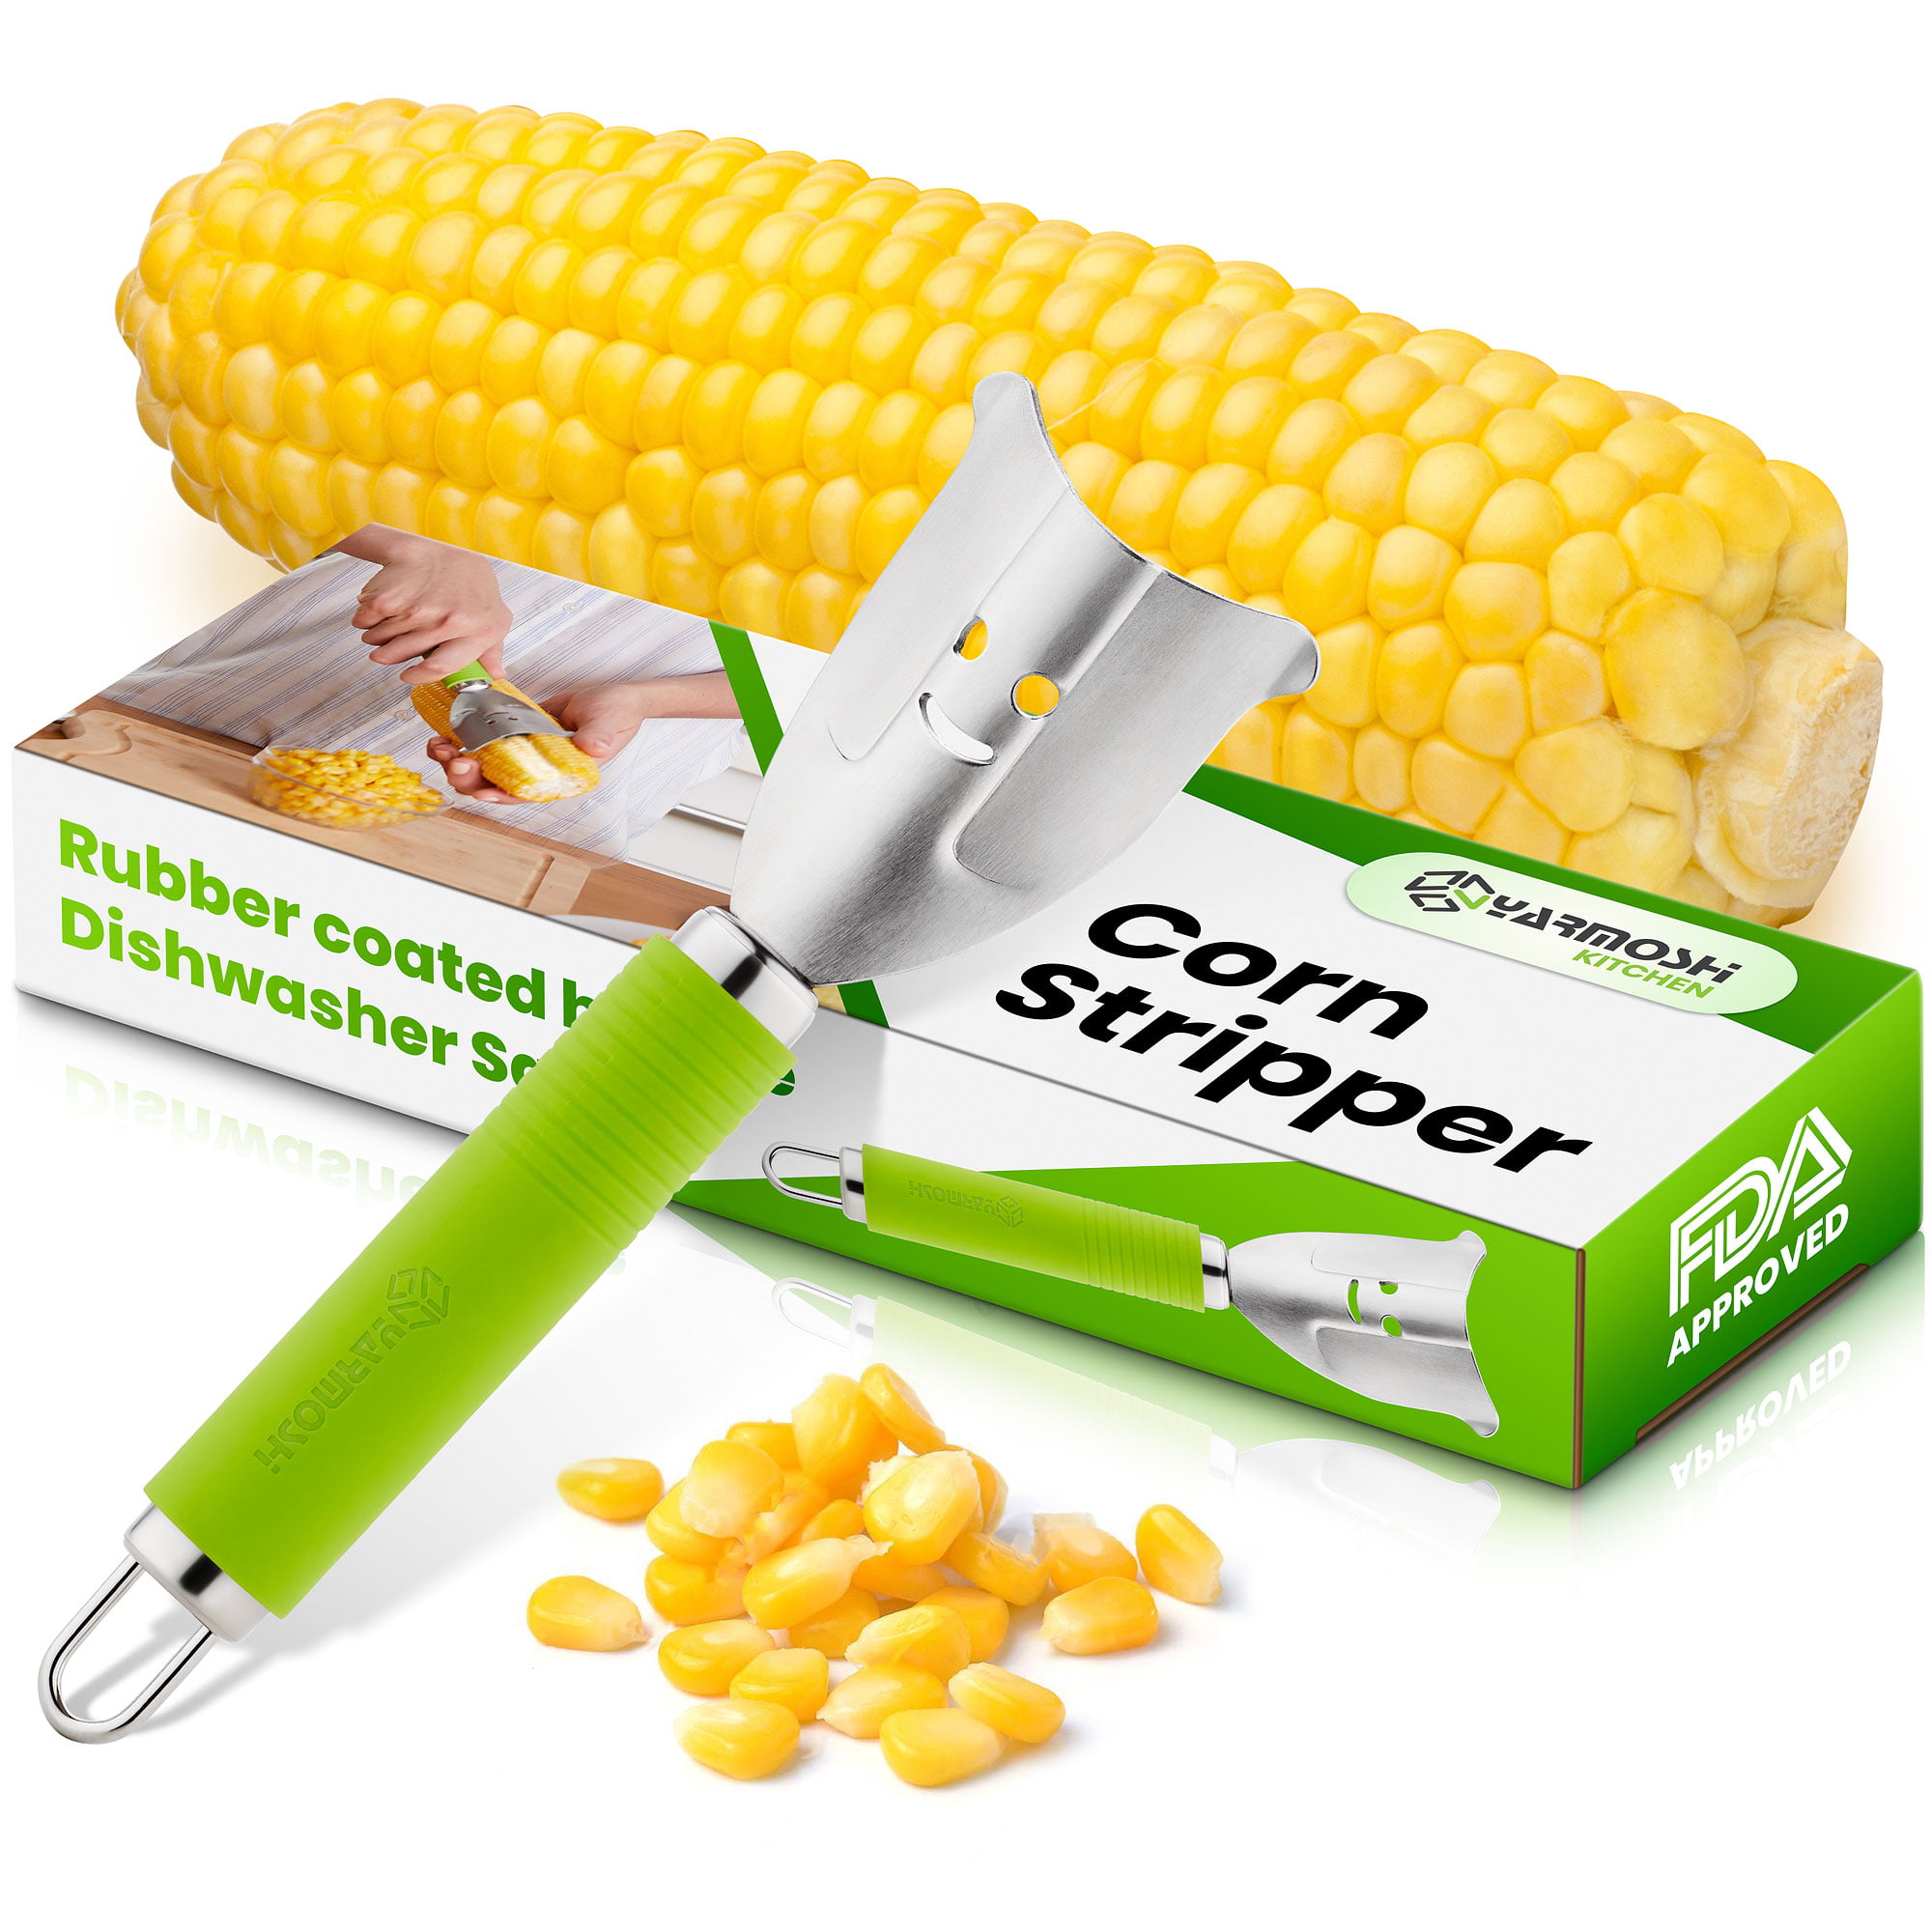 Details about   2 Sets of Yellow Corn Cob Cradles Easily Grasp & Hold Corn 